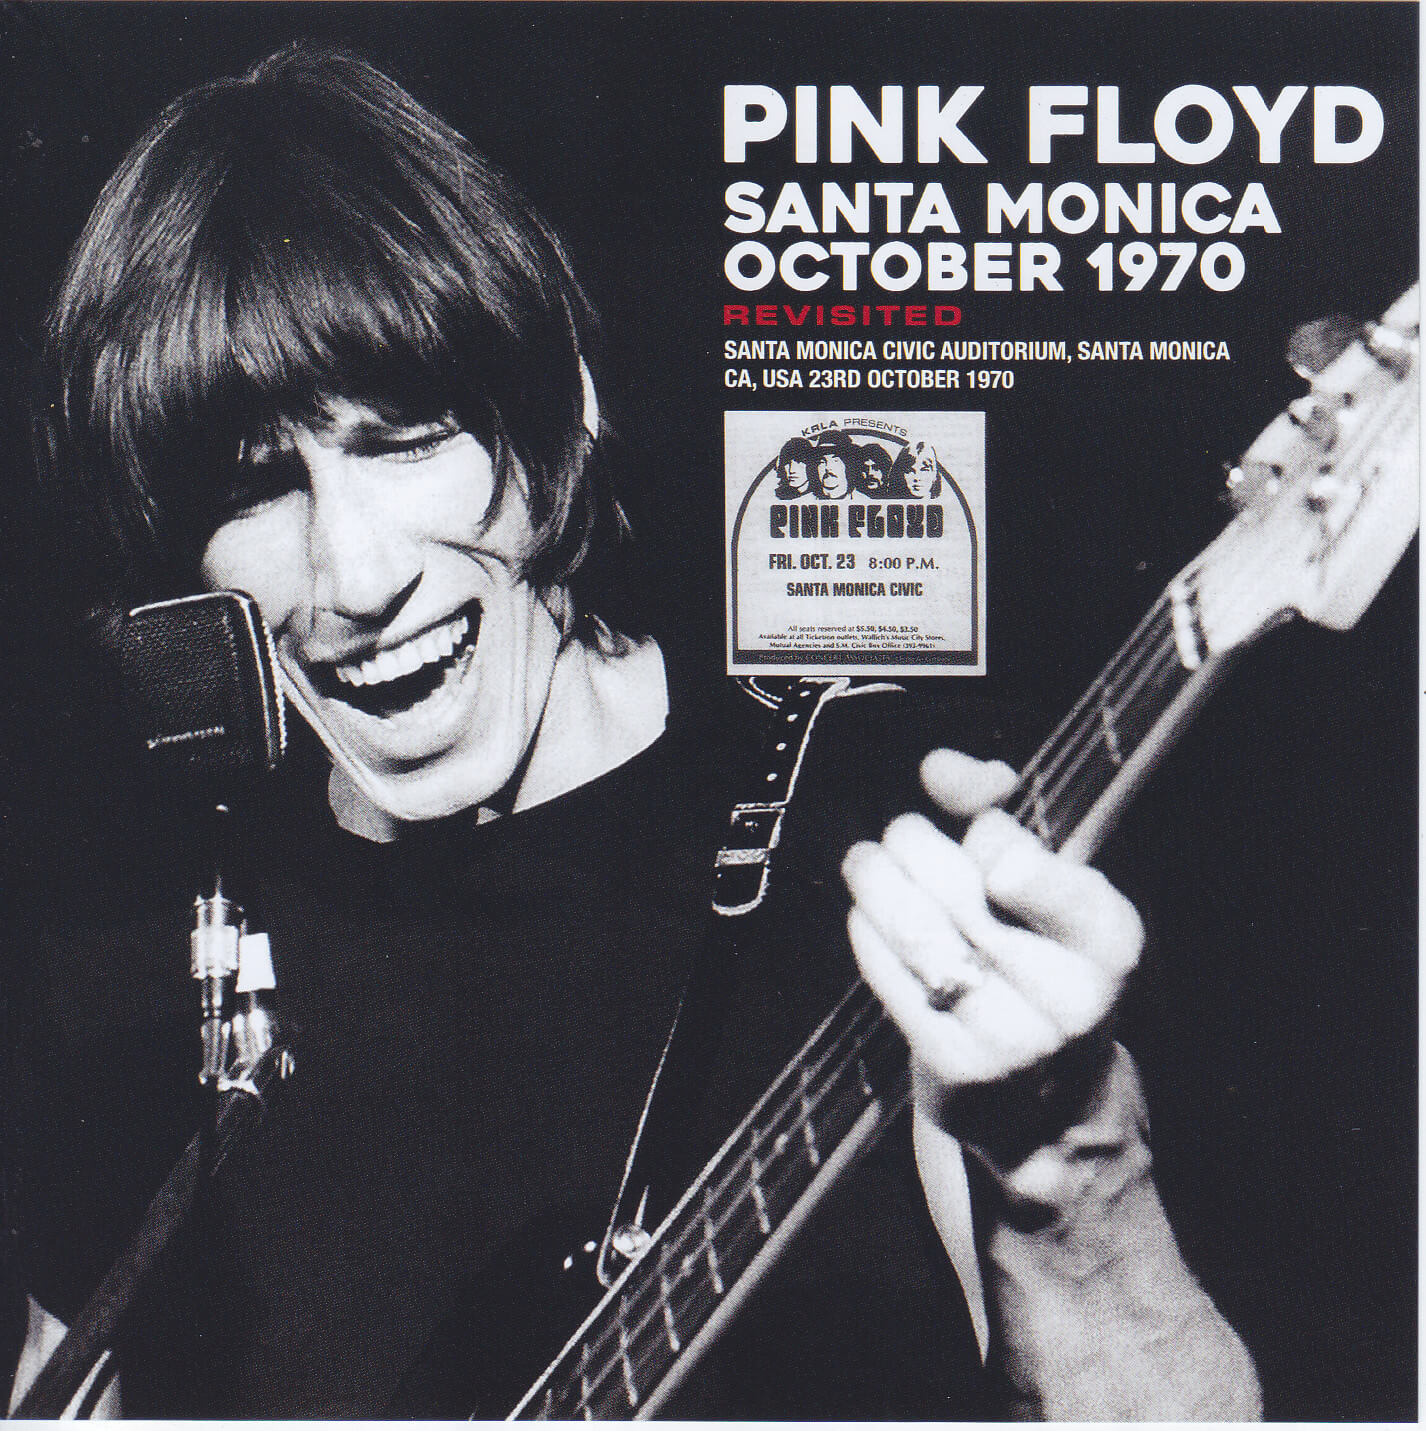 PINK FLOYD - Santa Monica, October 1970 Revisited - LIMITED AND NUMBERED JAPANESE EDITION